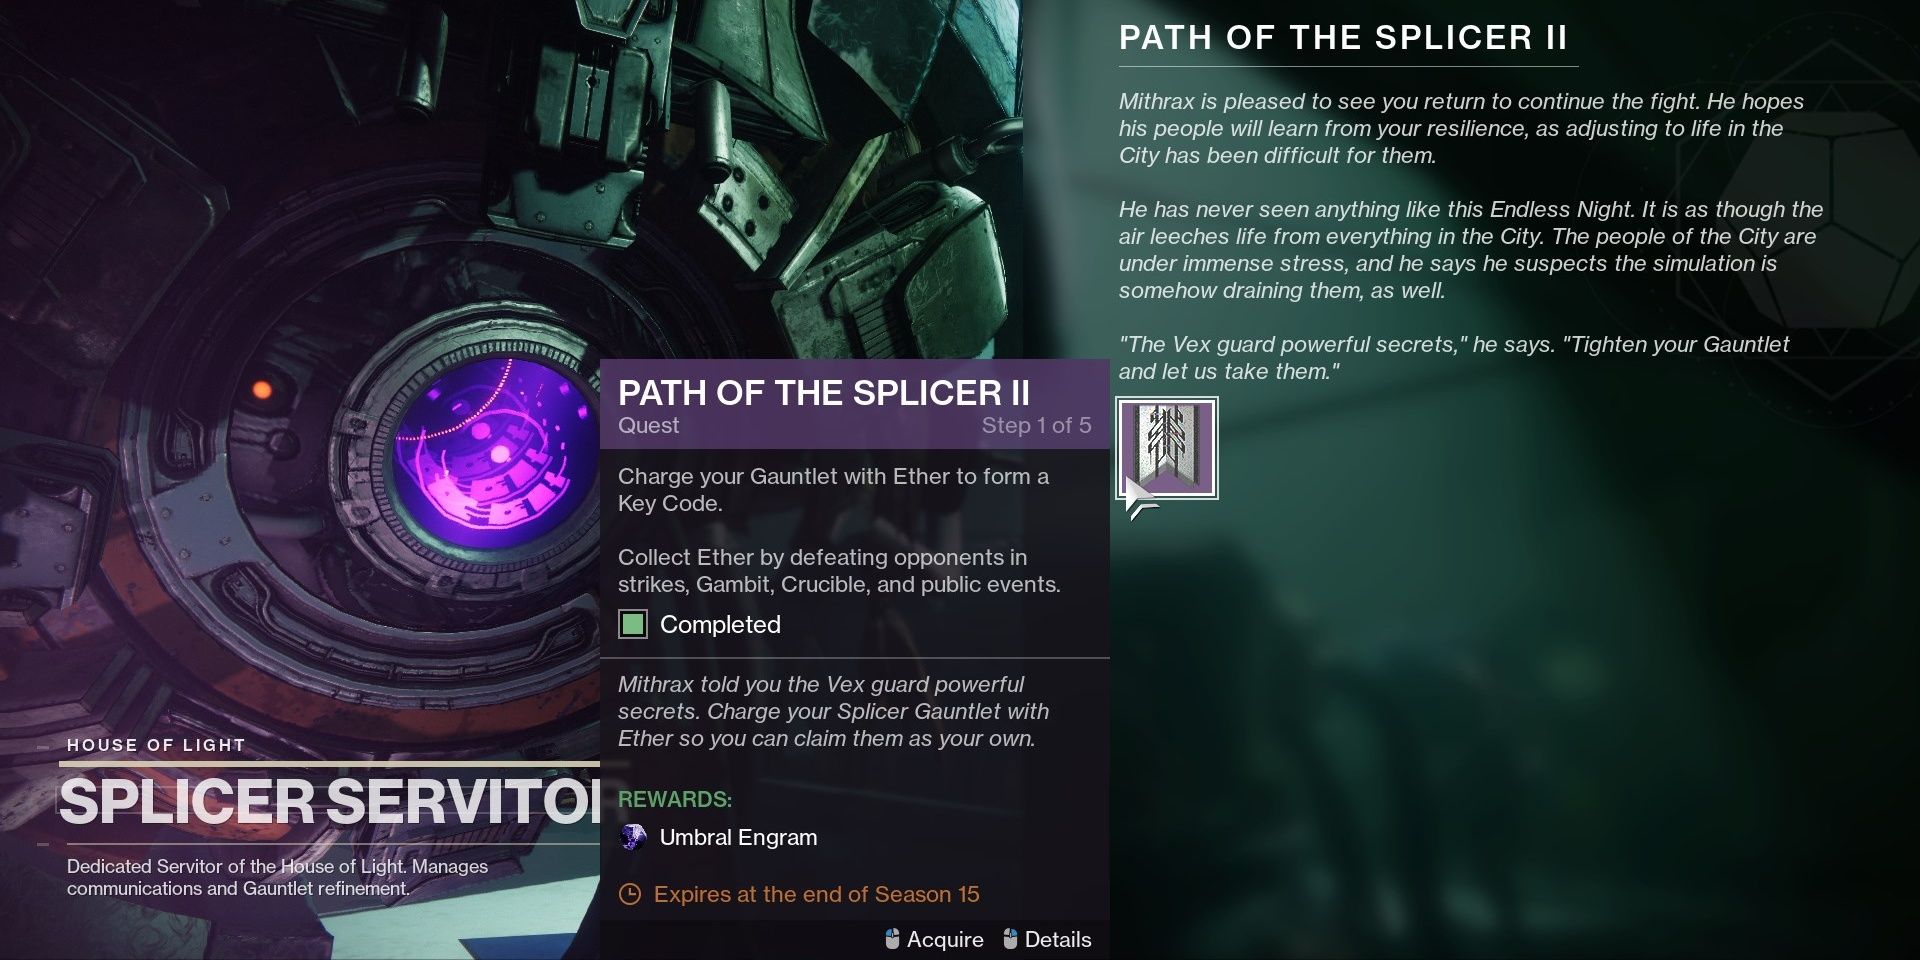 Destiny 2 Path of the Splicer II Quest